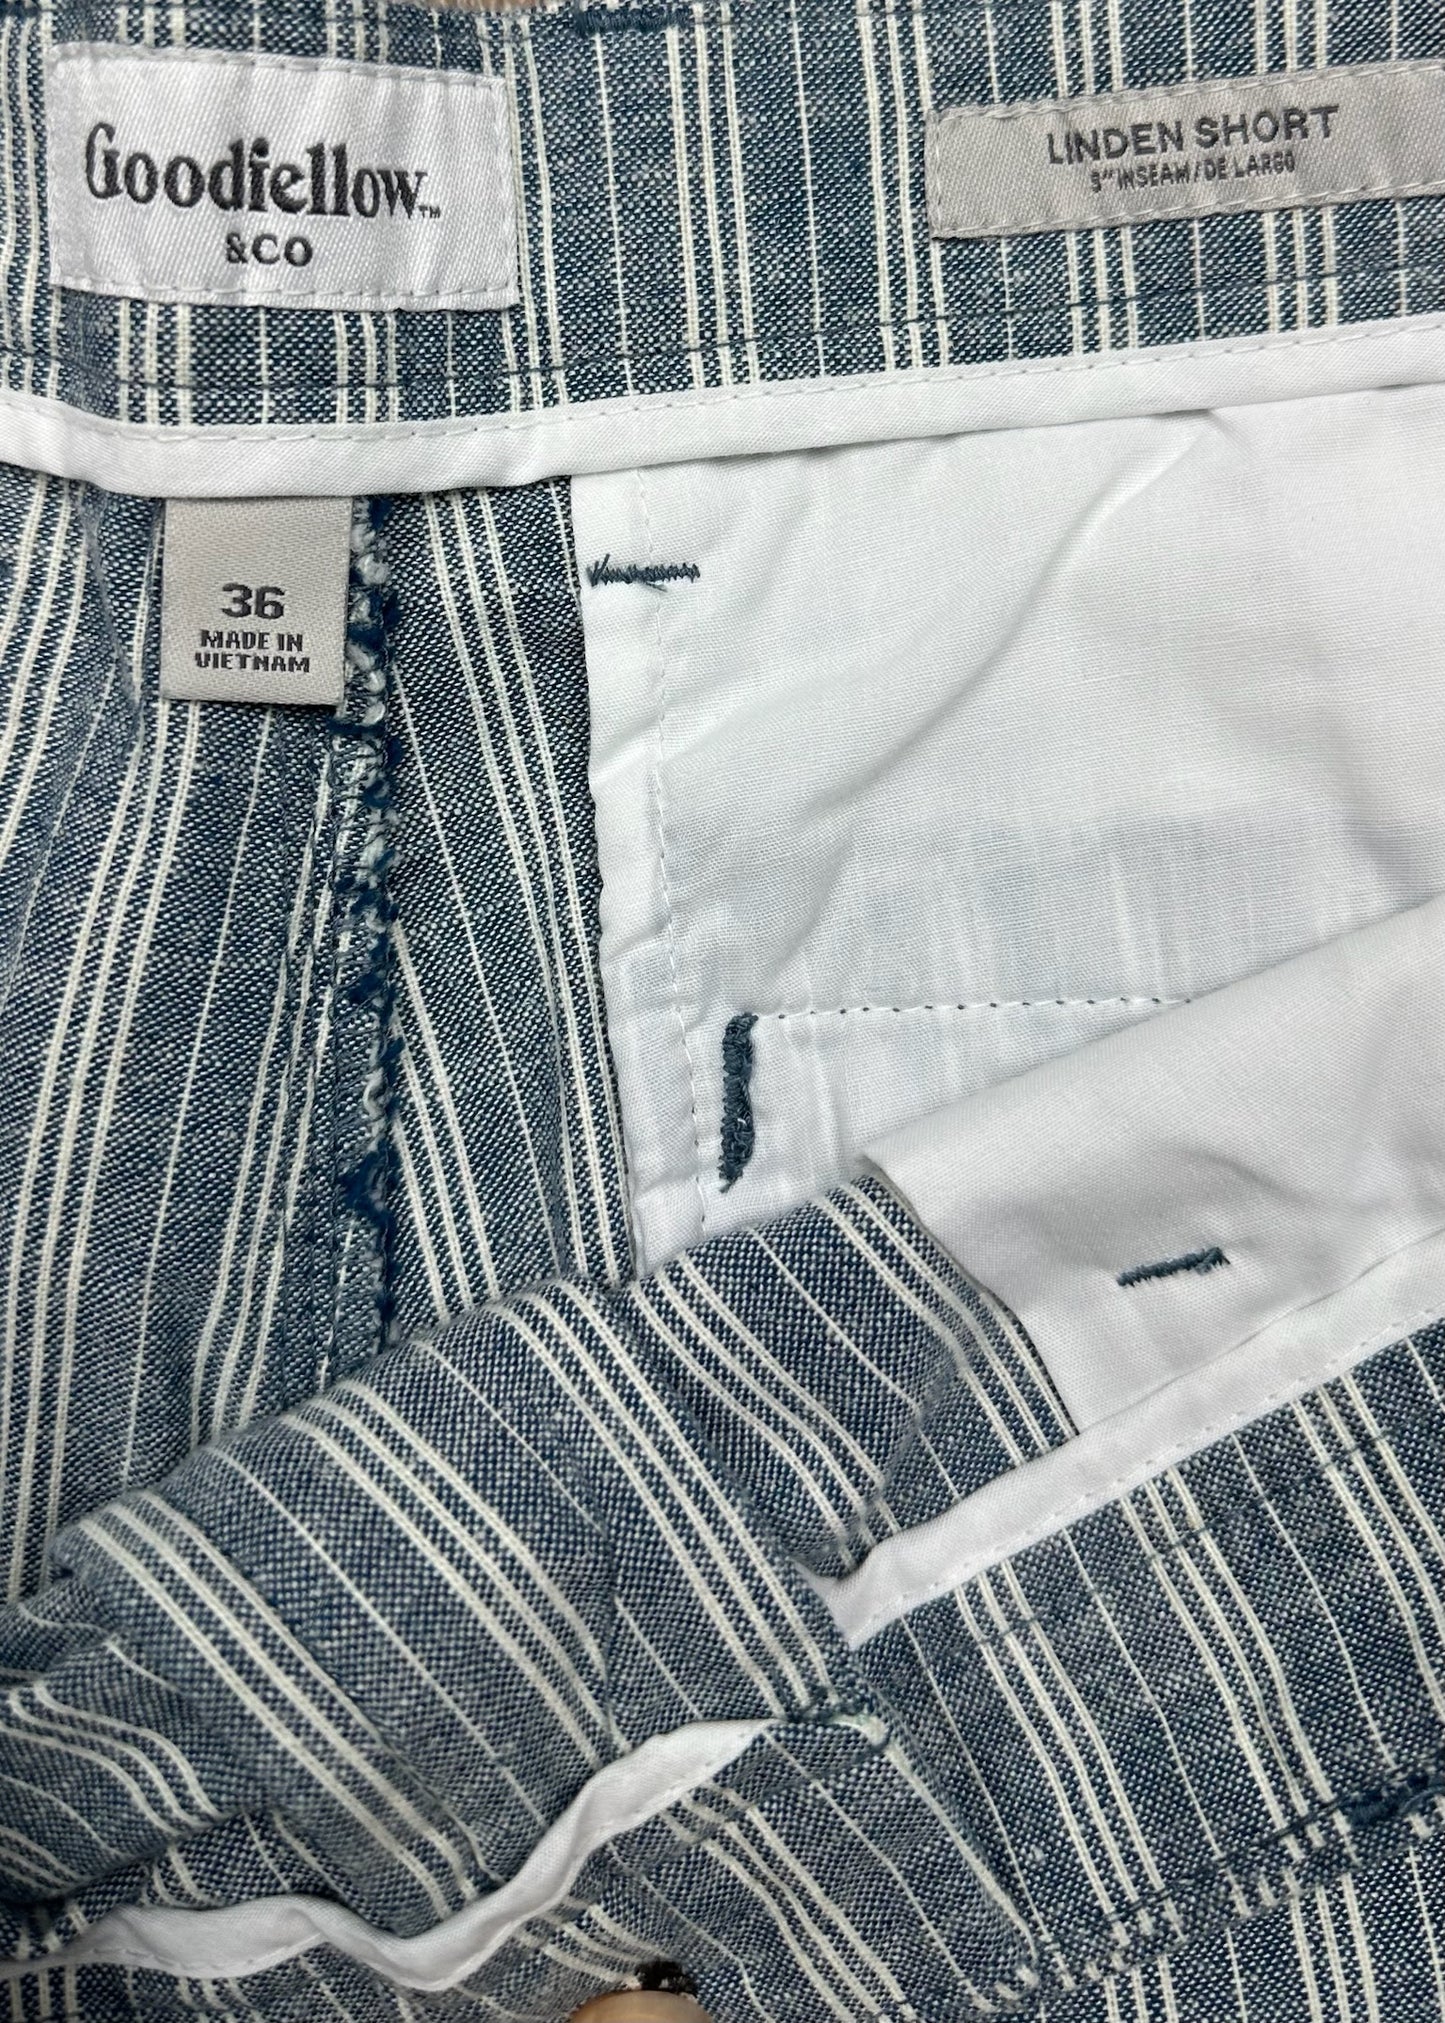 Linden Short Blue Striped by Good Fellow & co